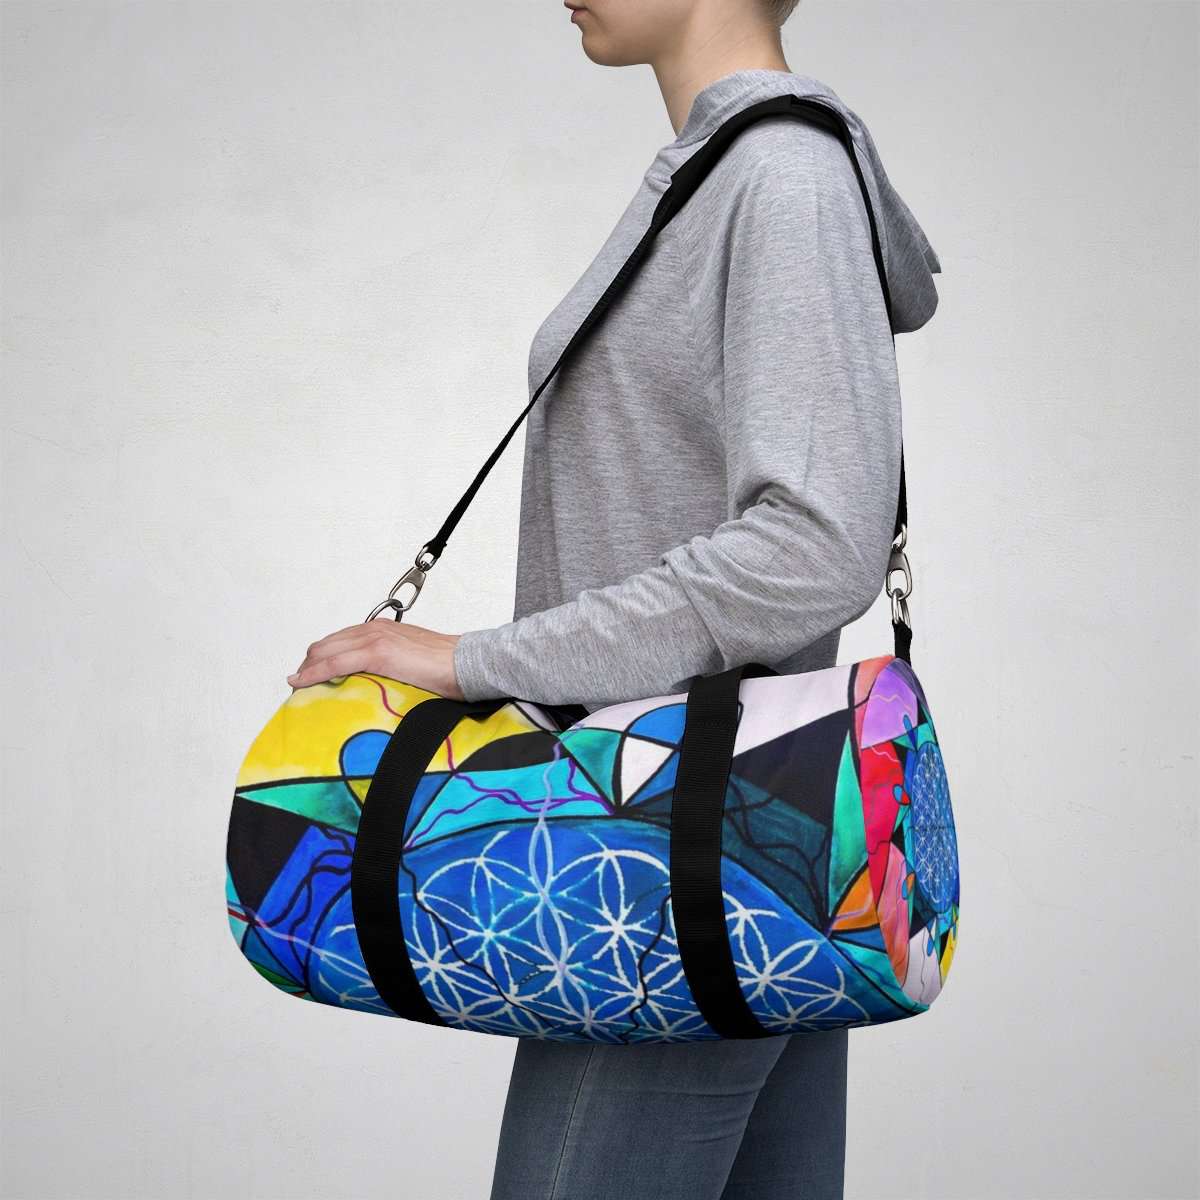 the-official-source-for-the-flower-of-life-duffle-bag-online_5.jpg